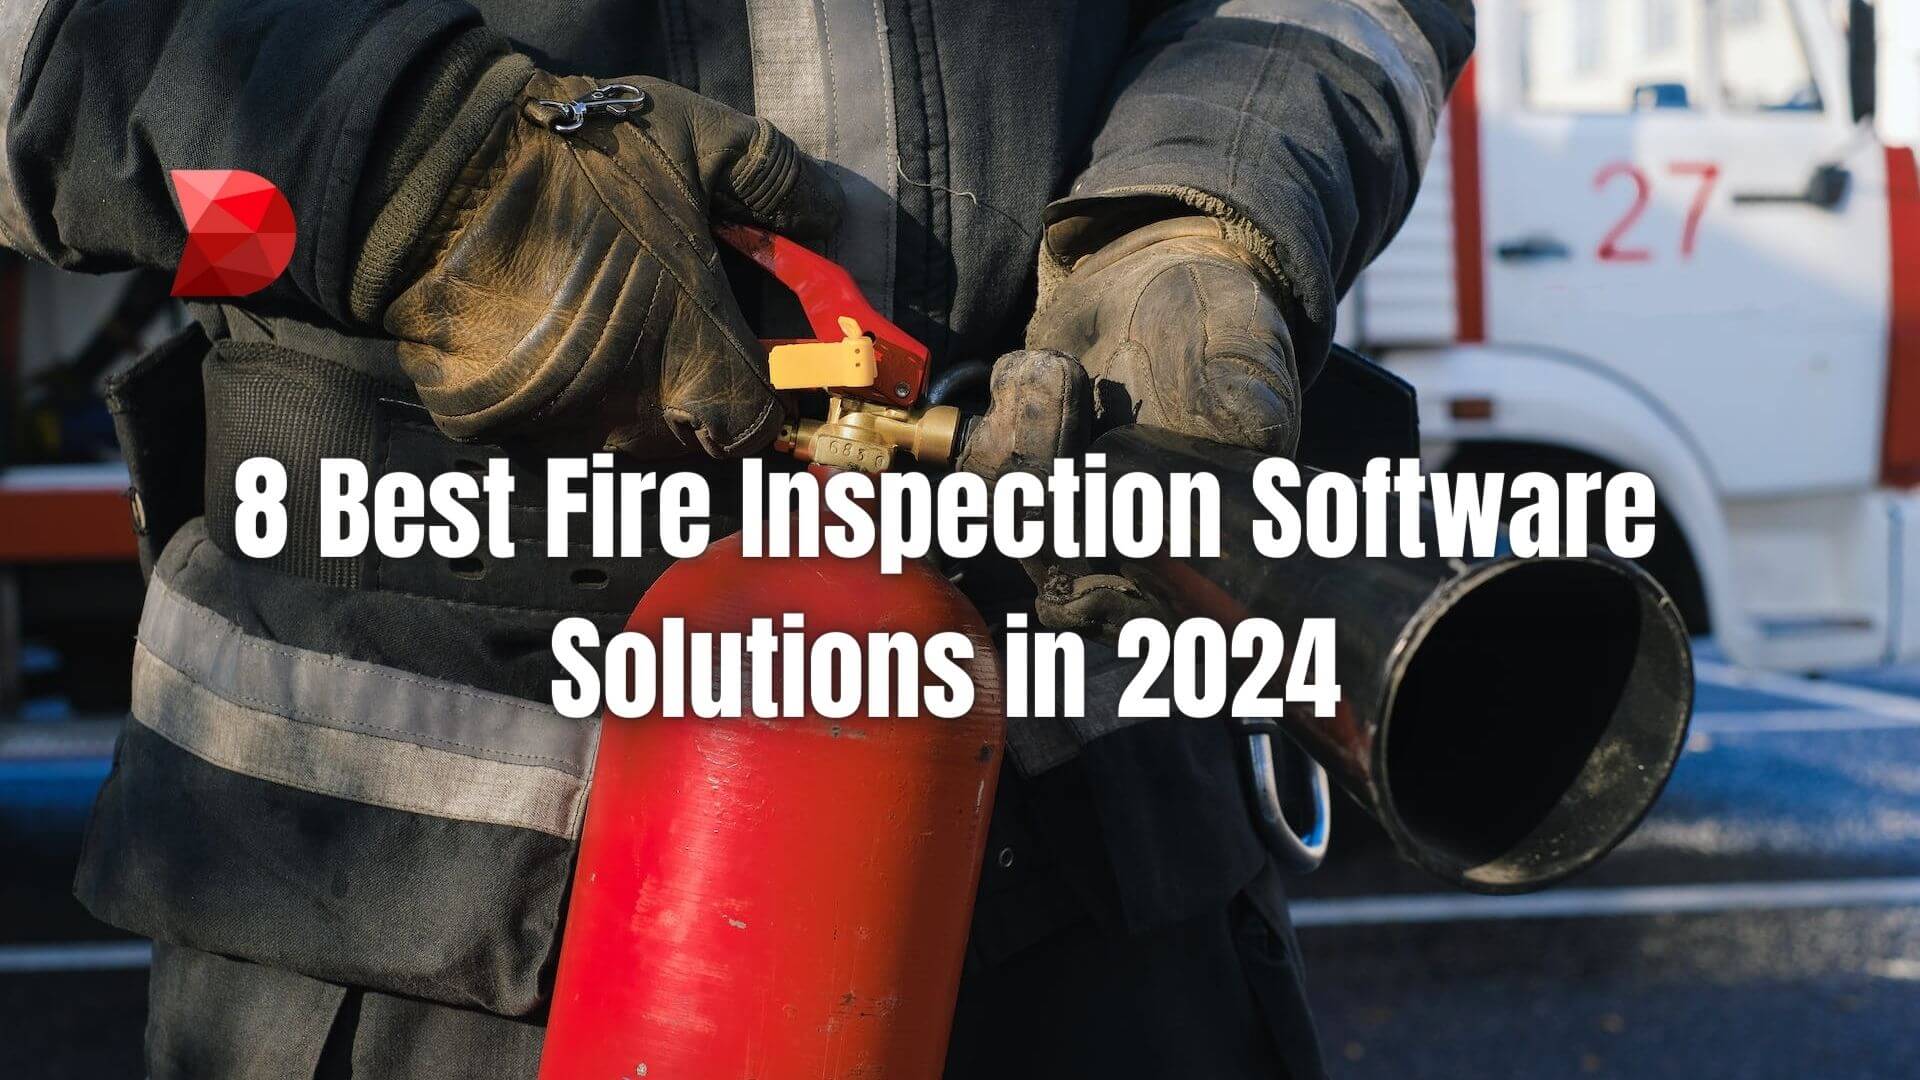 Navigate the fire safety landscape confidently! Click here to explore our guide to the 8 best fire inspection software solutions in 2024.